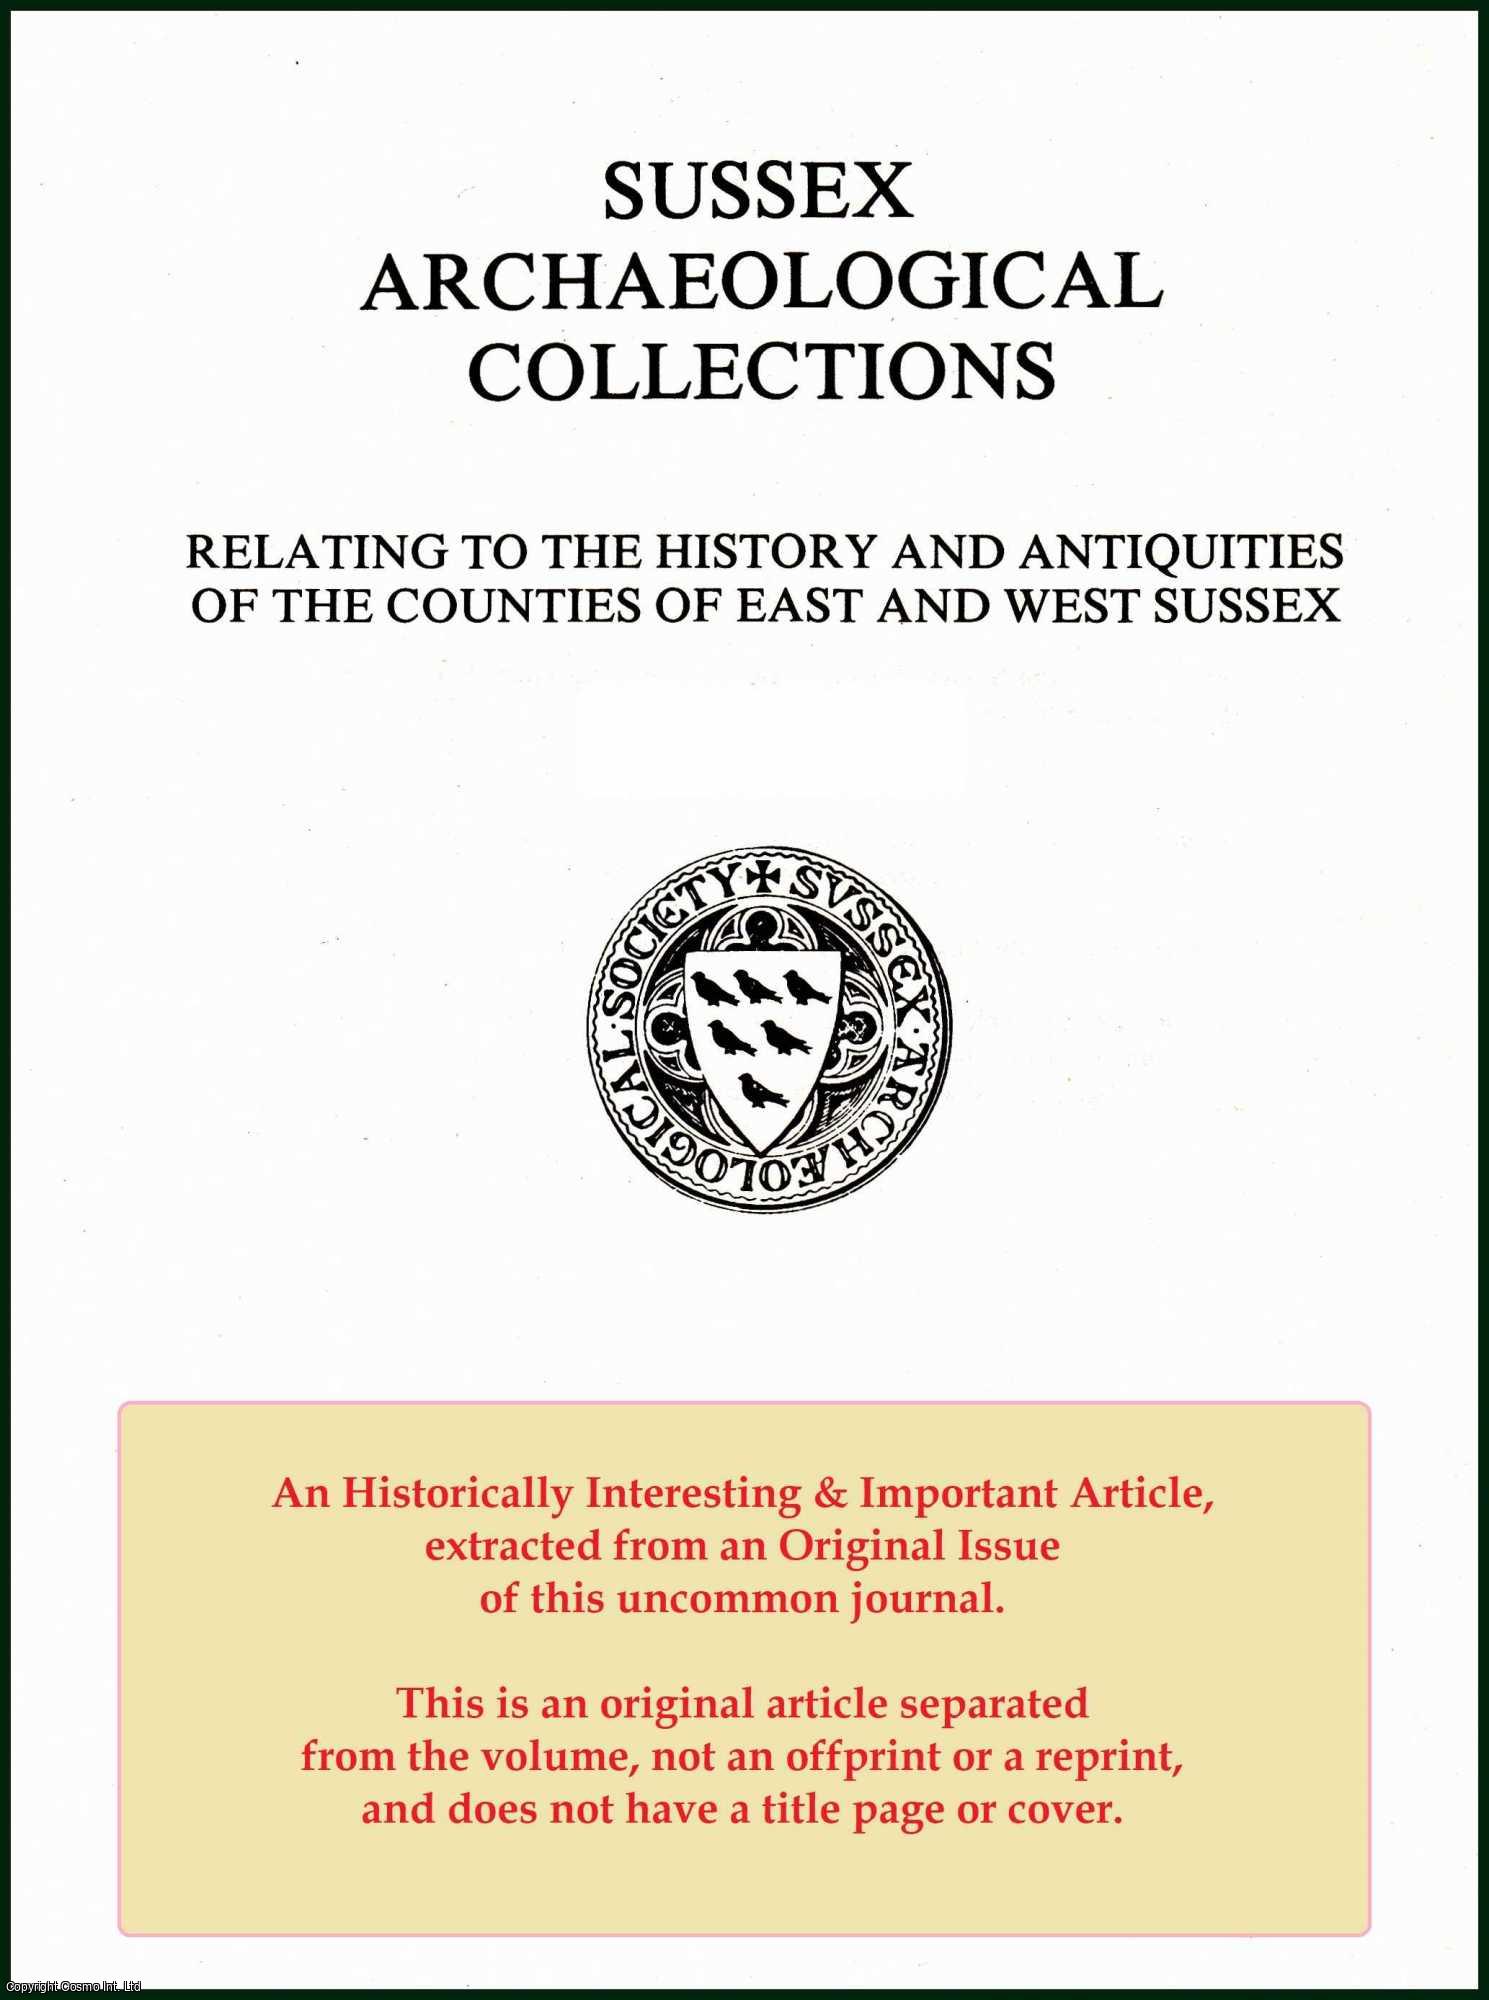 John Robert Daniel-Tyssen - The Parliamentary Surveys of The County of Sussex, Anno Dom. 1649-1653. An original article from the Journal of the Sussex Archaeological Society, 1871.